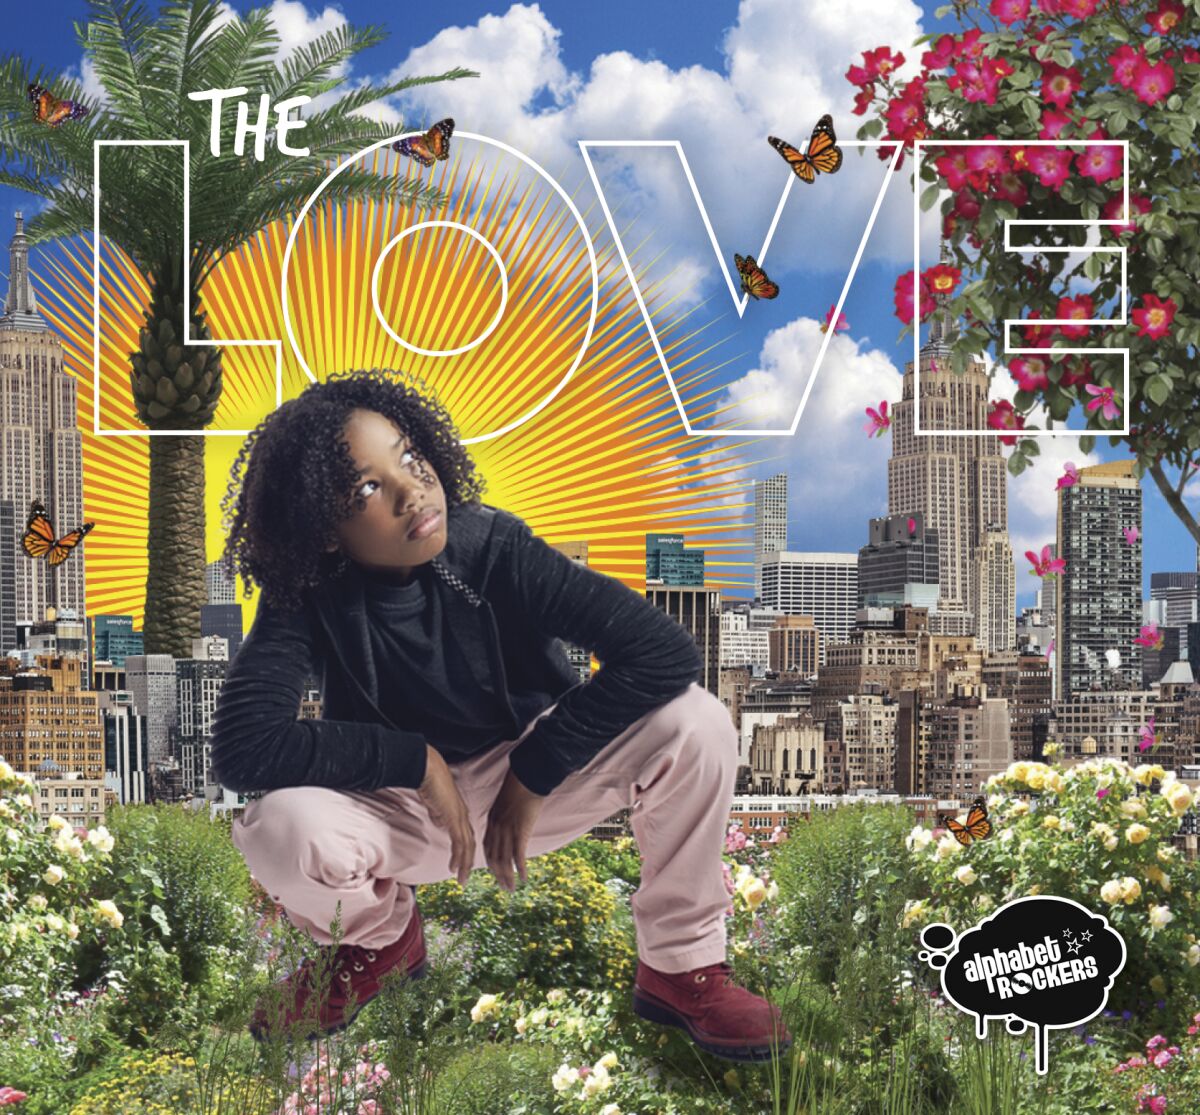 Alphabet Rockers' "The Love" album cover featuring 12-ear-old member Tommy Sheperd III